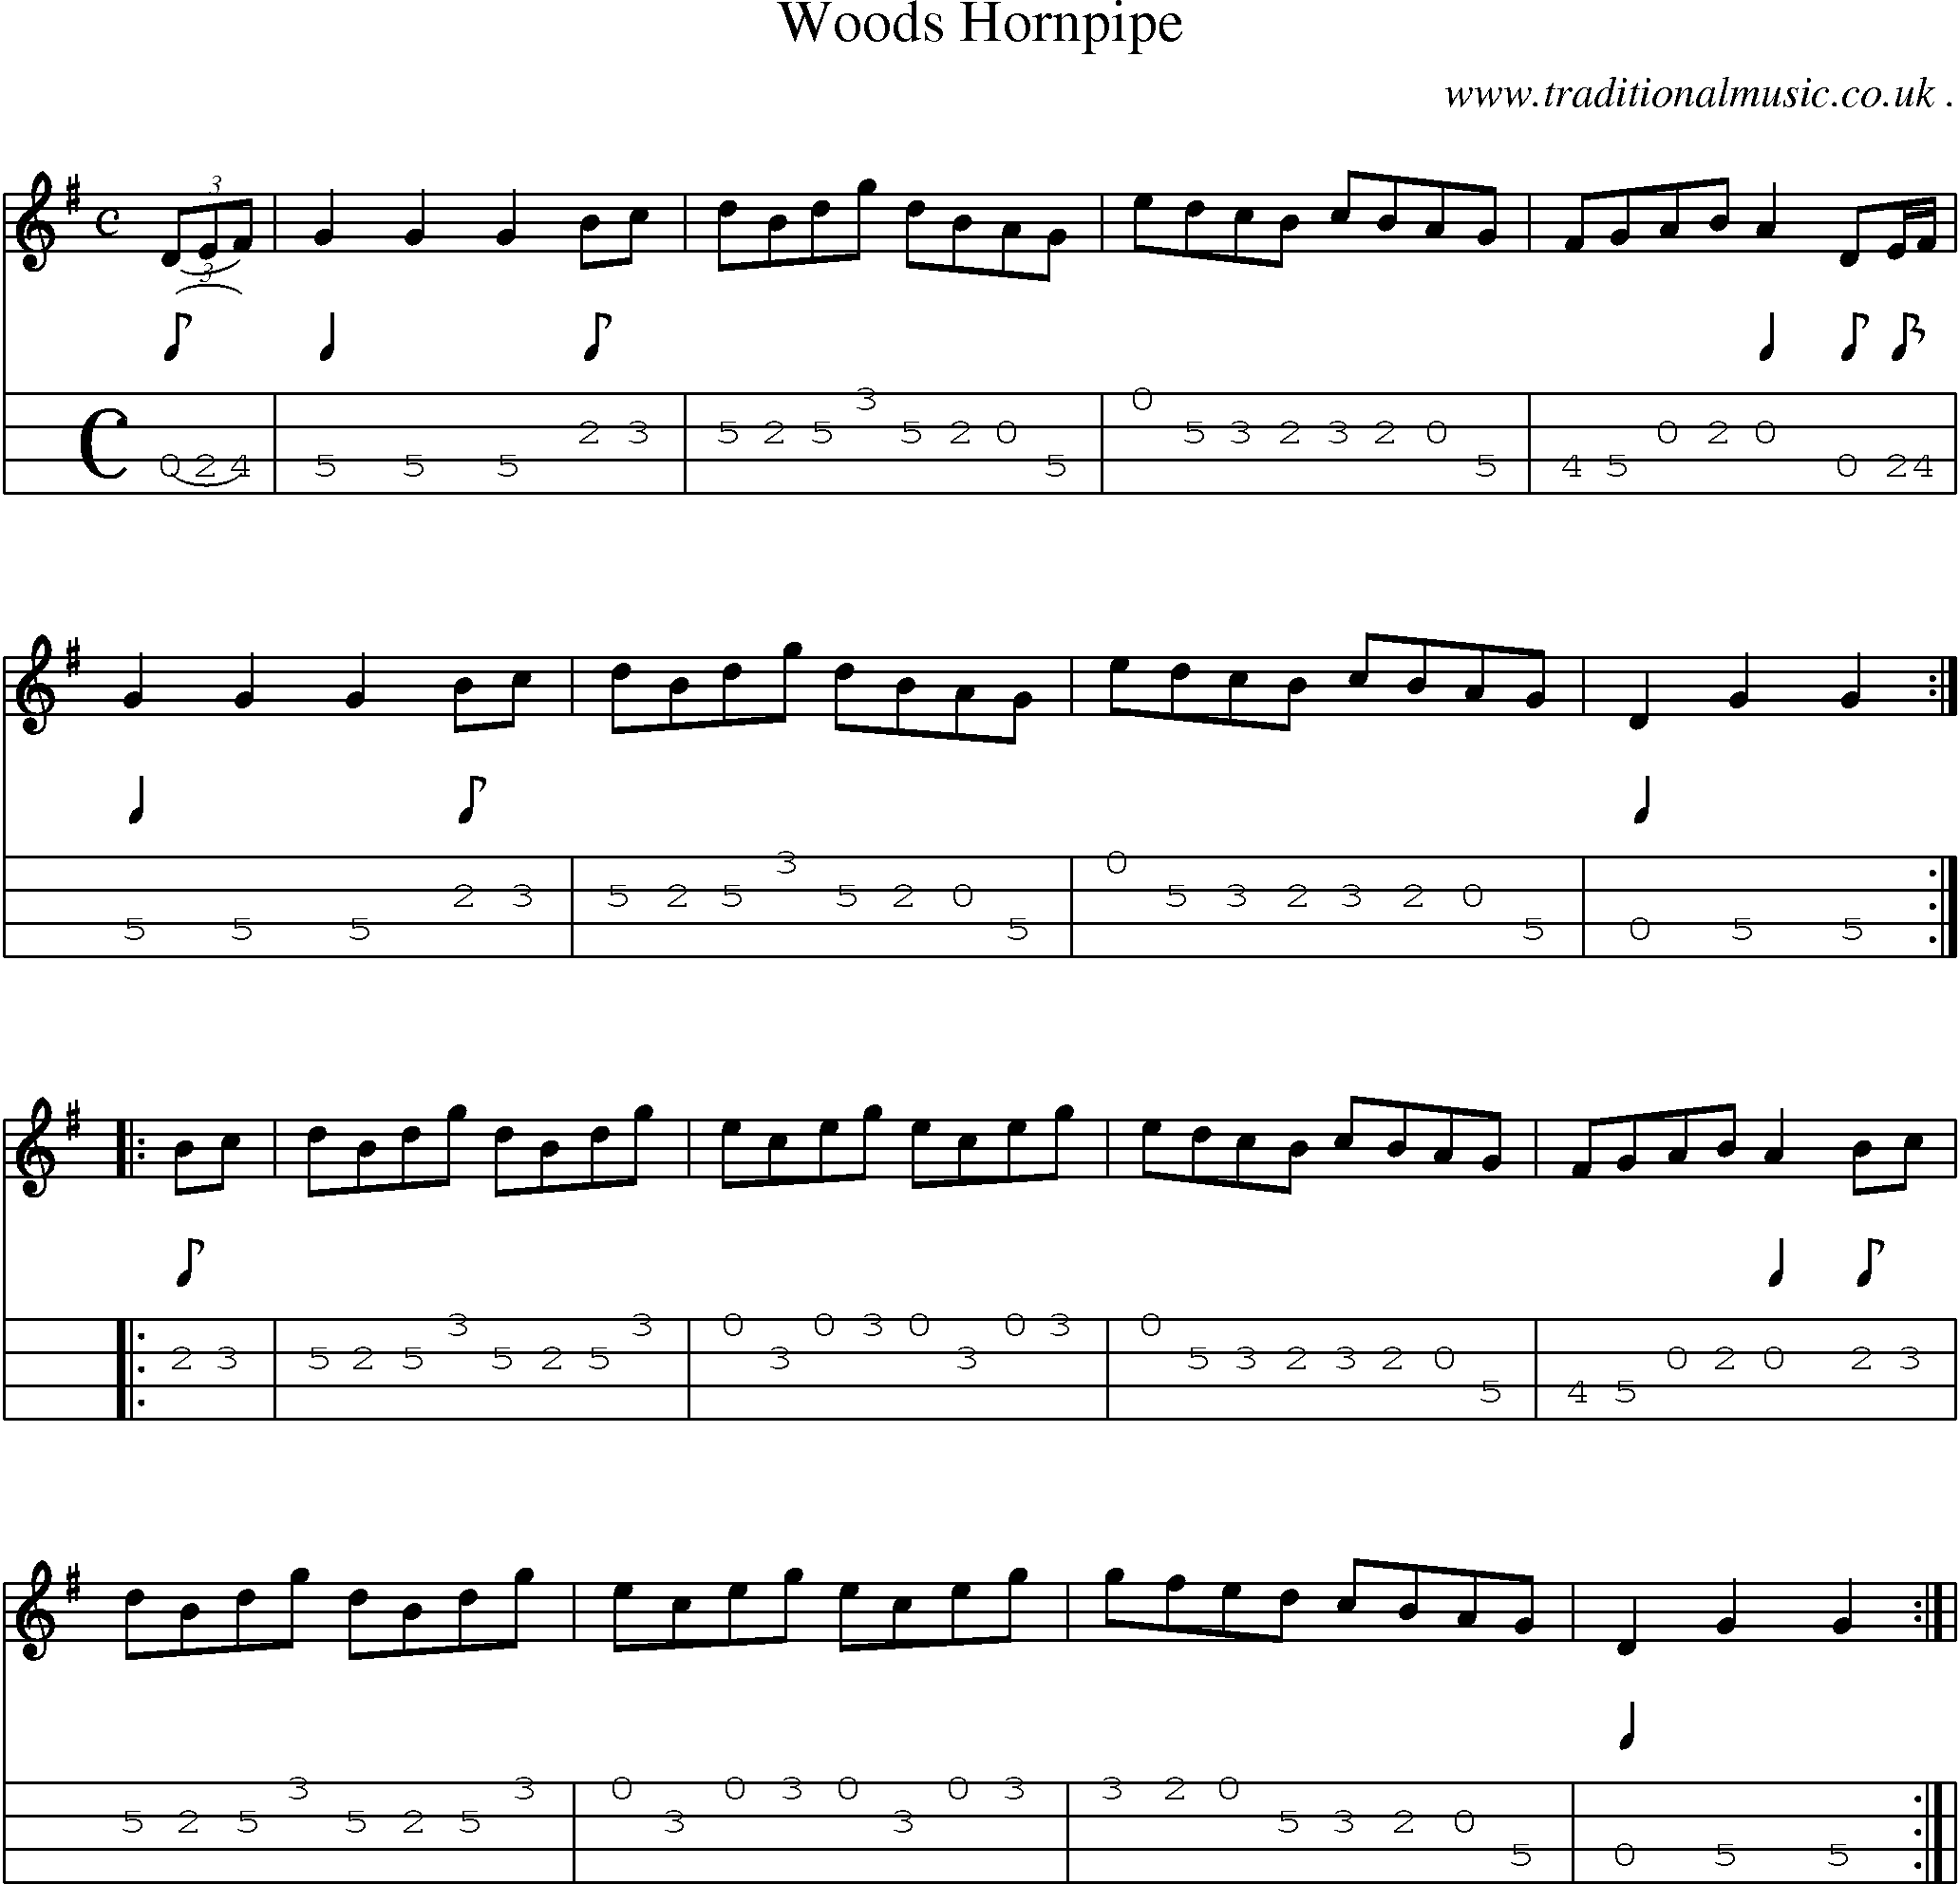 Sheet-Music and Mandolin Tabs for Woods Hornpipe